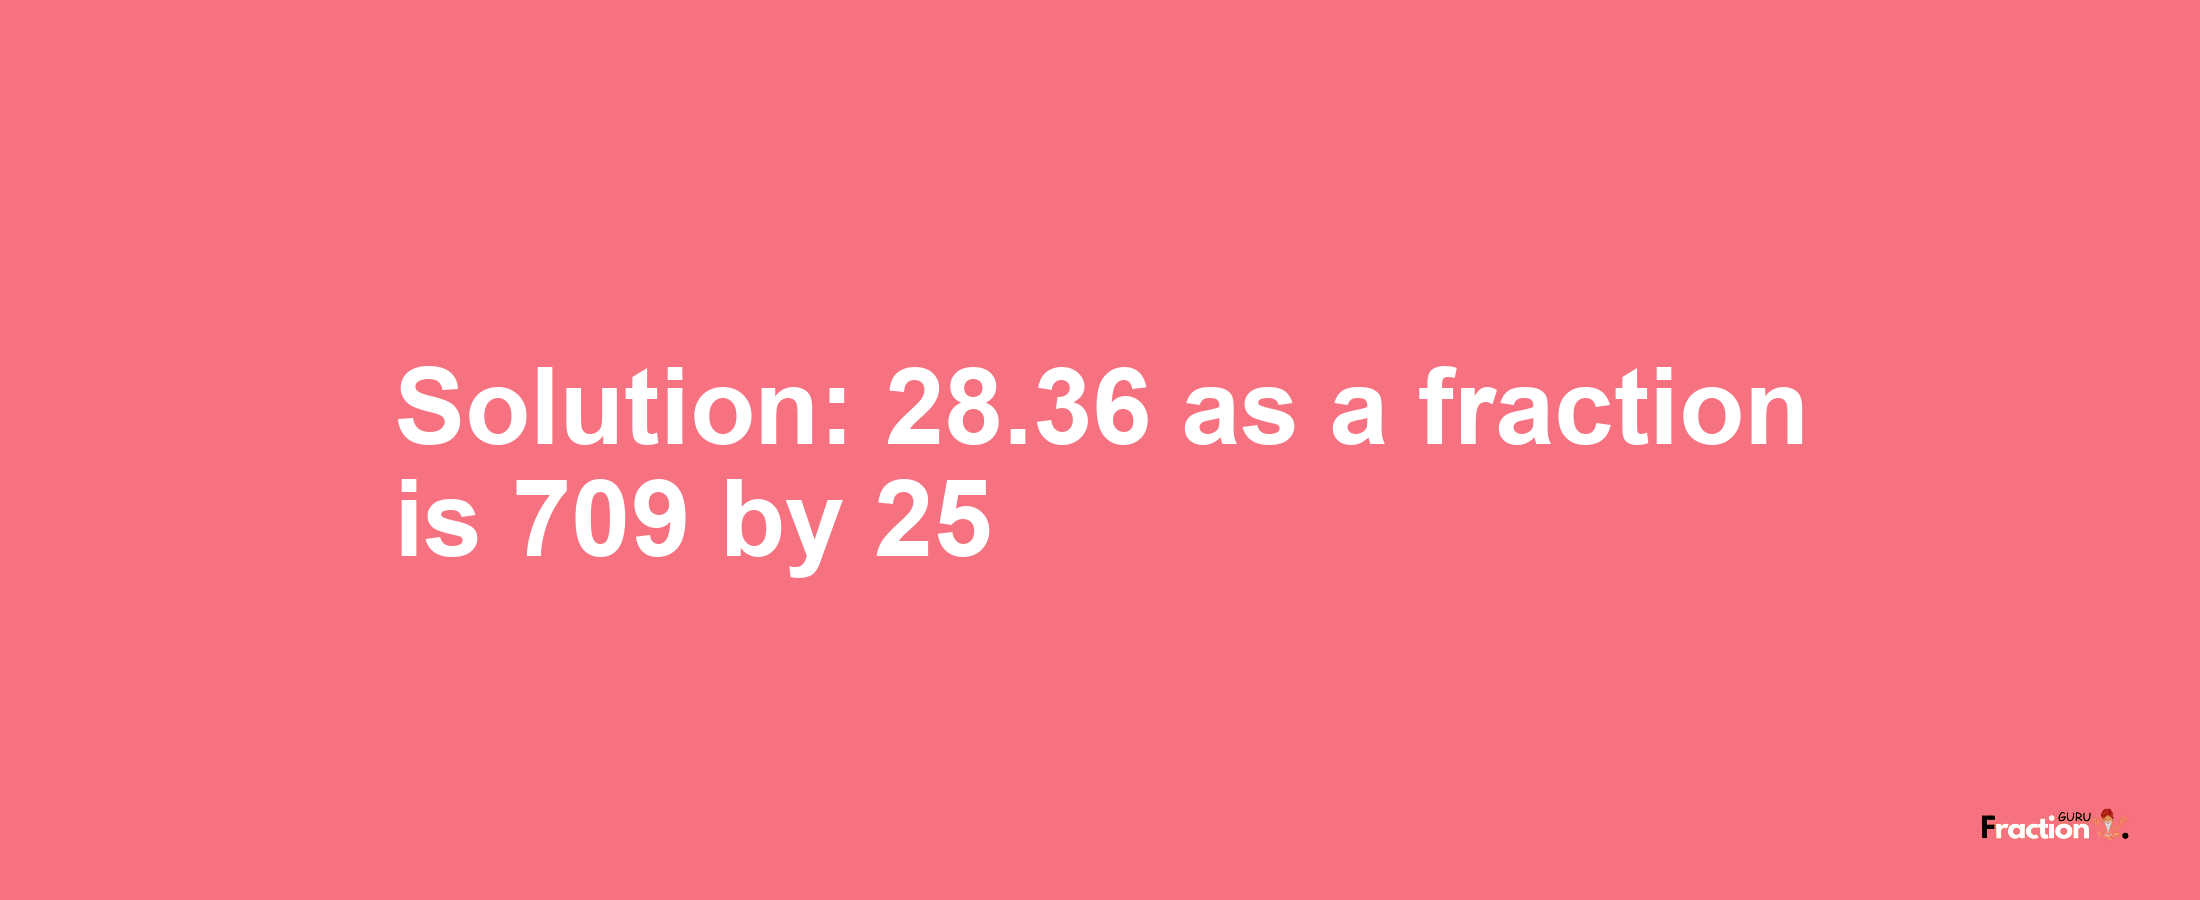 Solution:28.36 as a fraction is 709/25